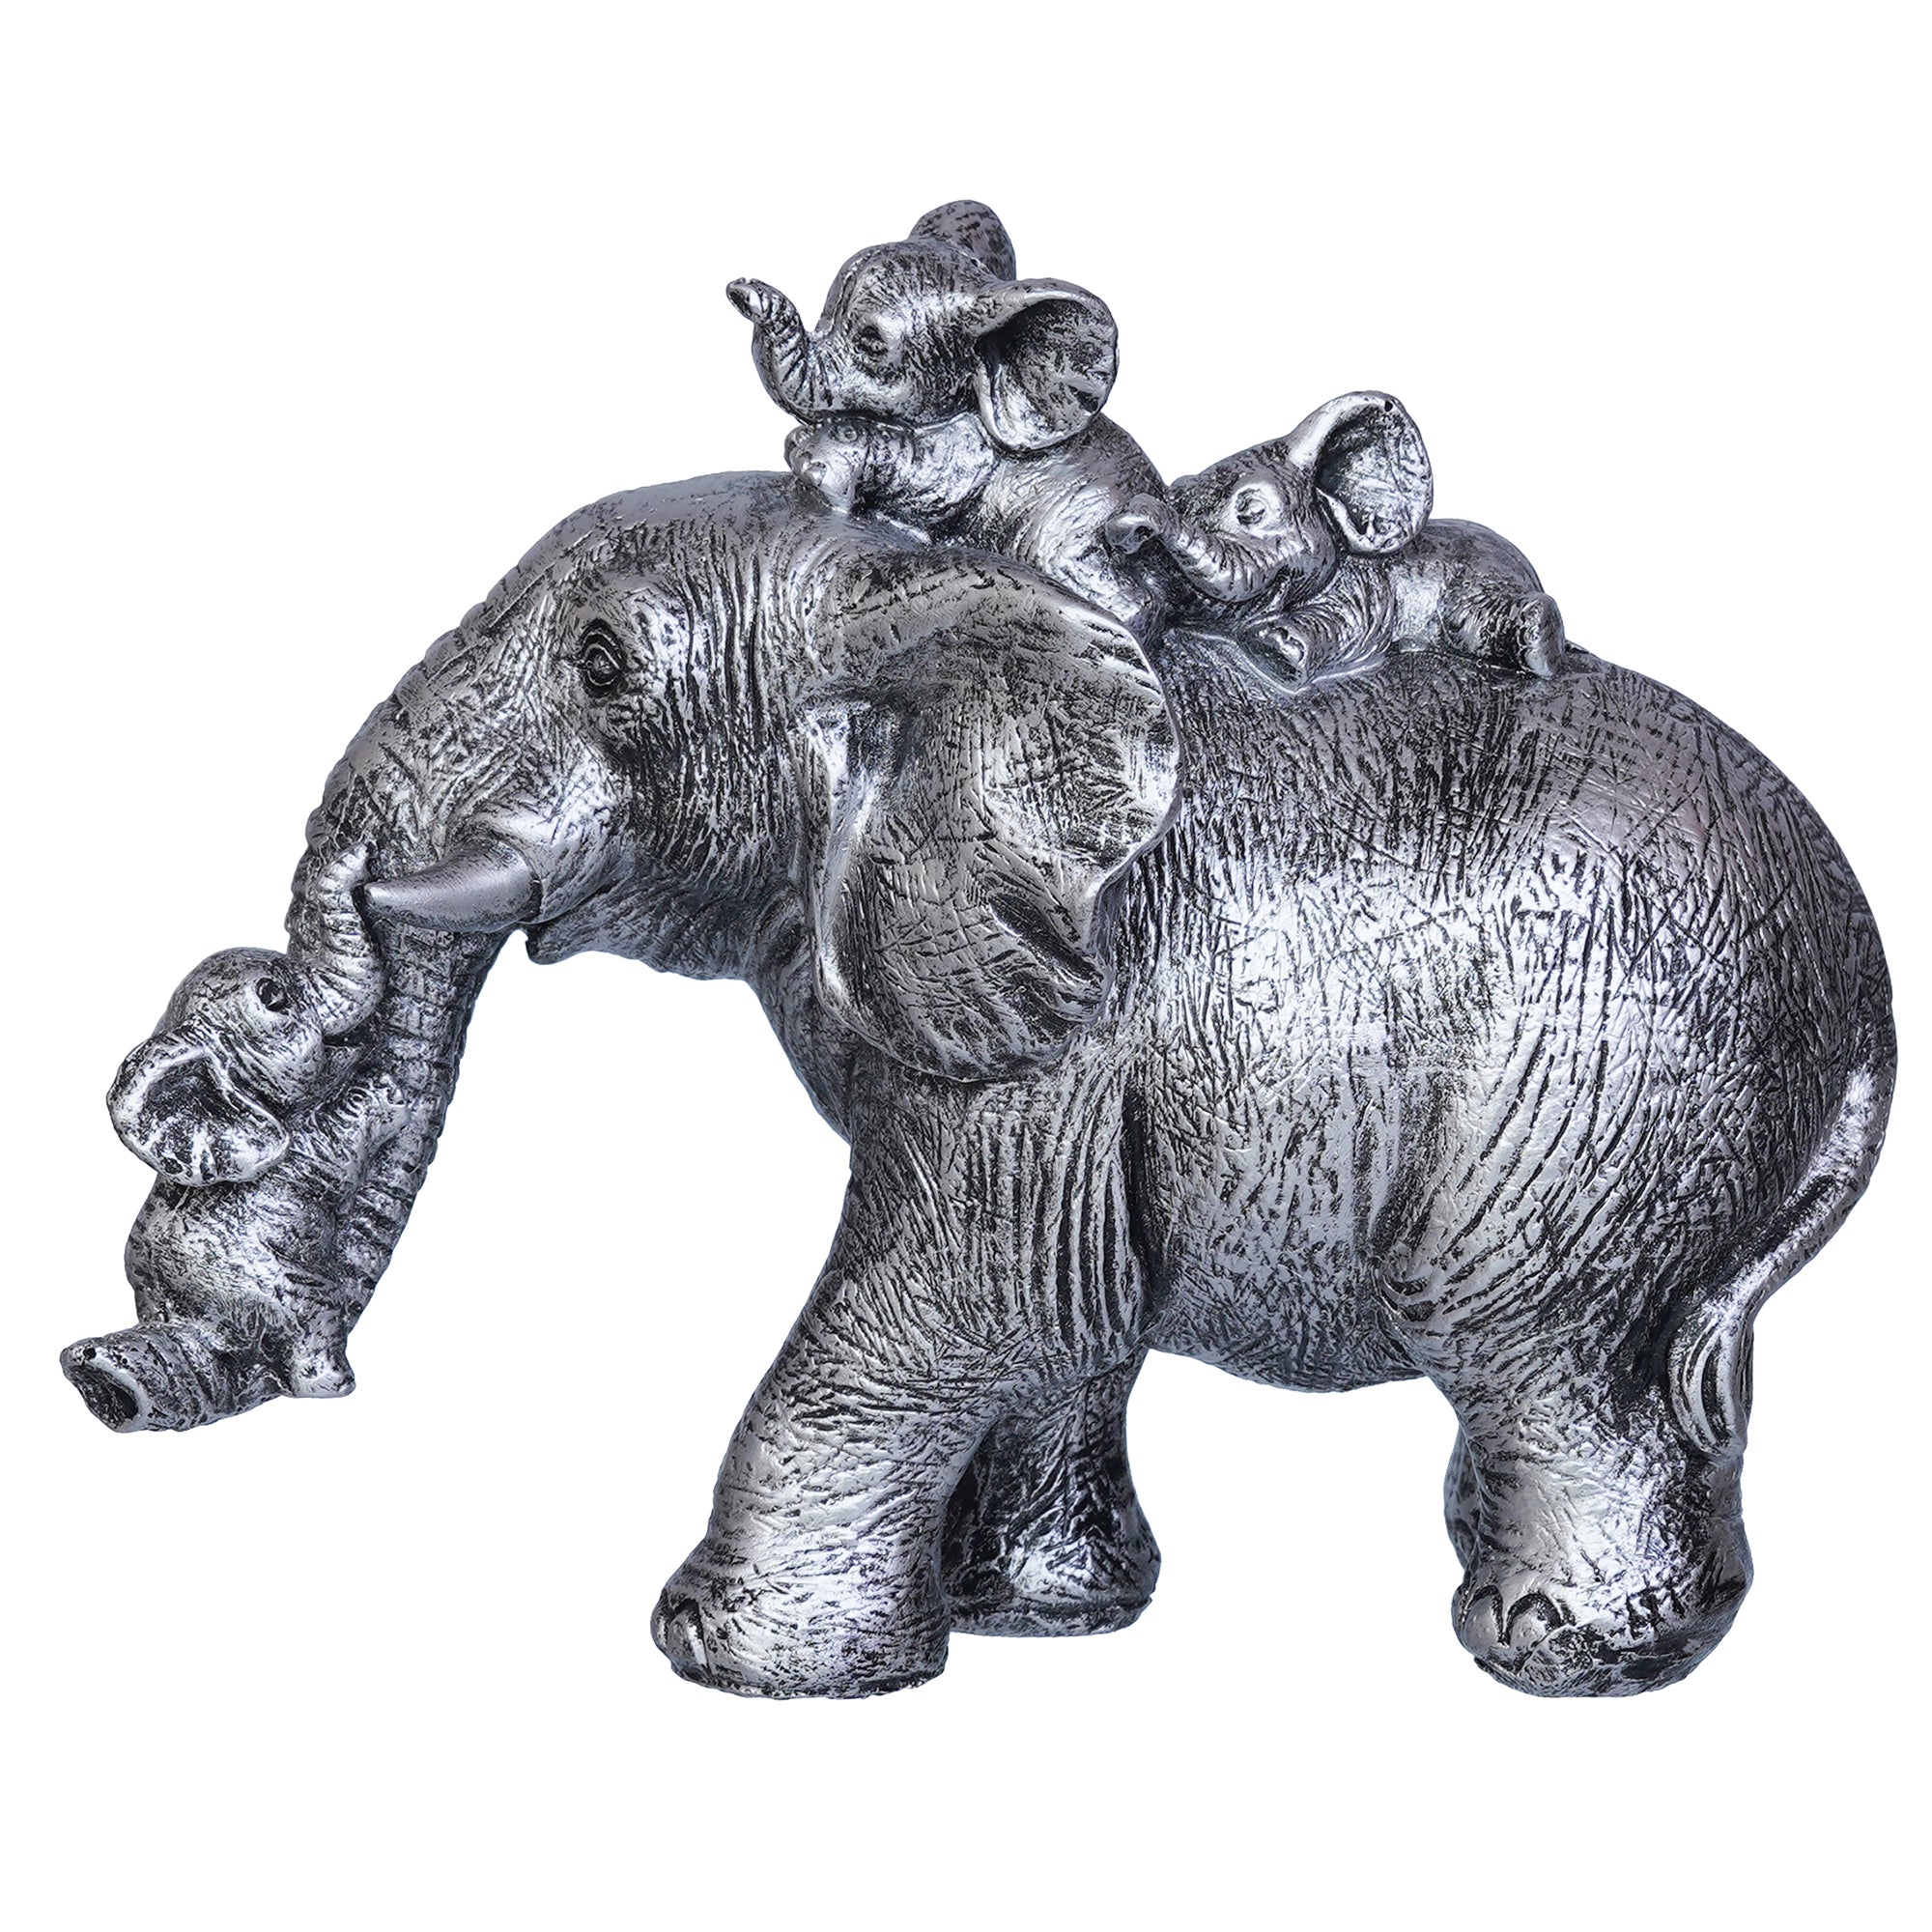 Cute Silver Elephant Statue Carries Three Calves on Its Back and Trunk 2